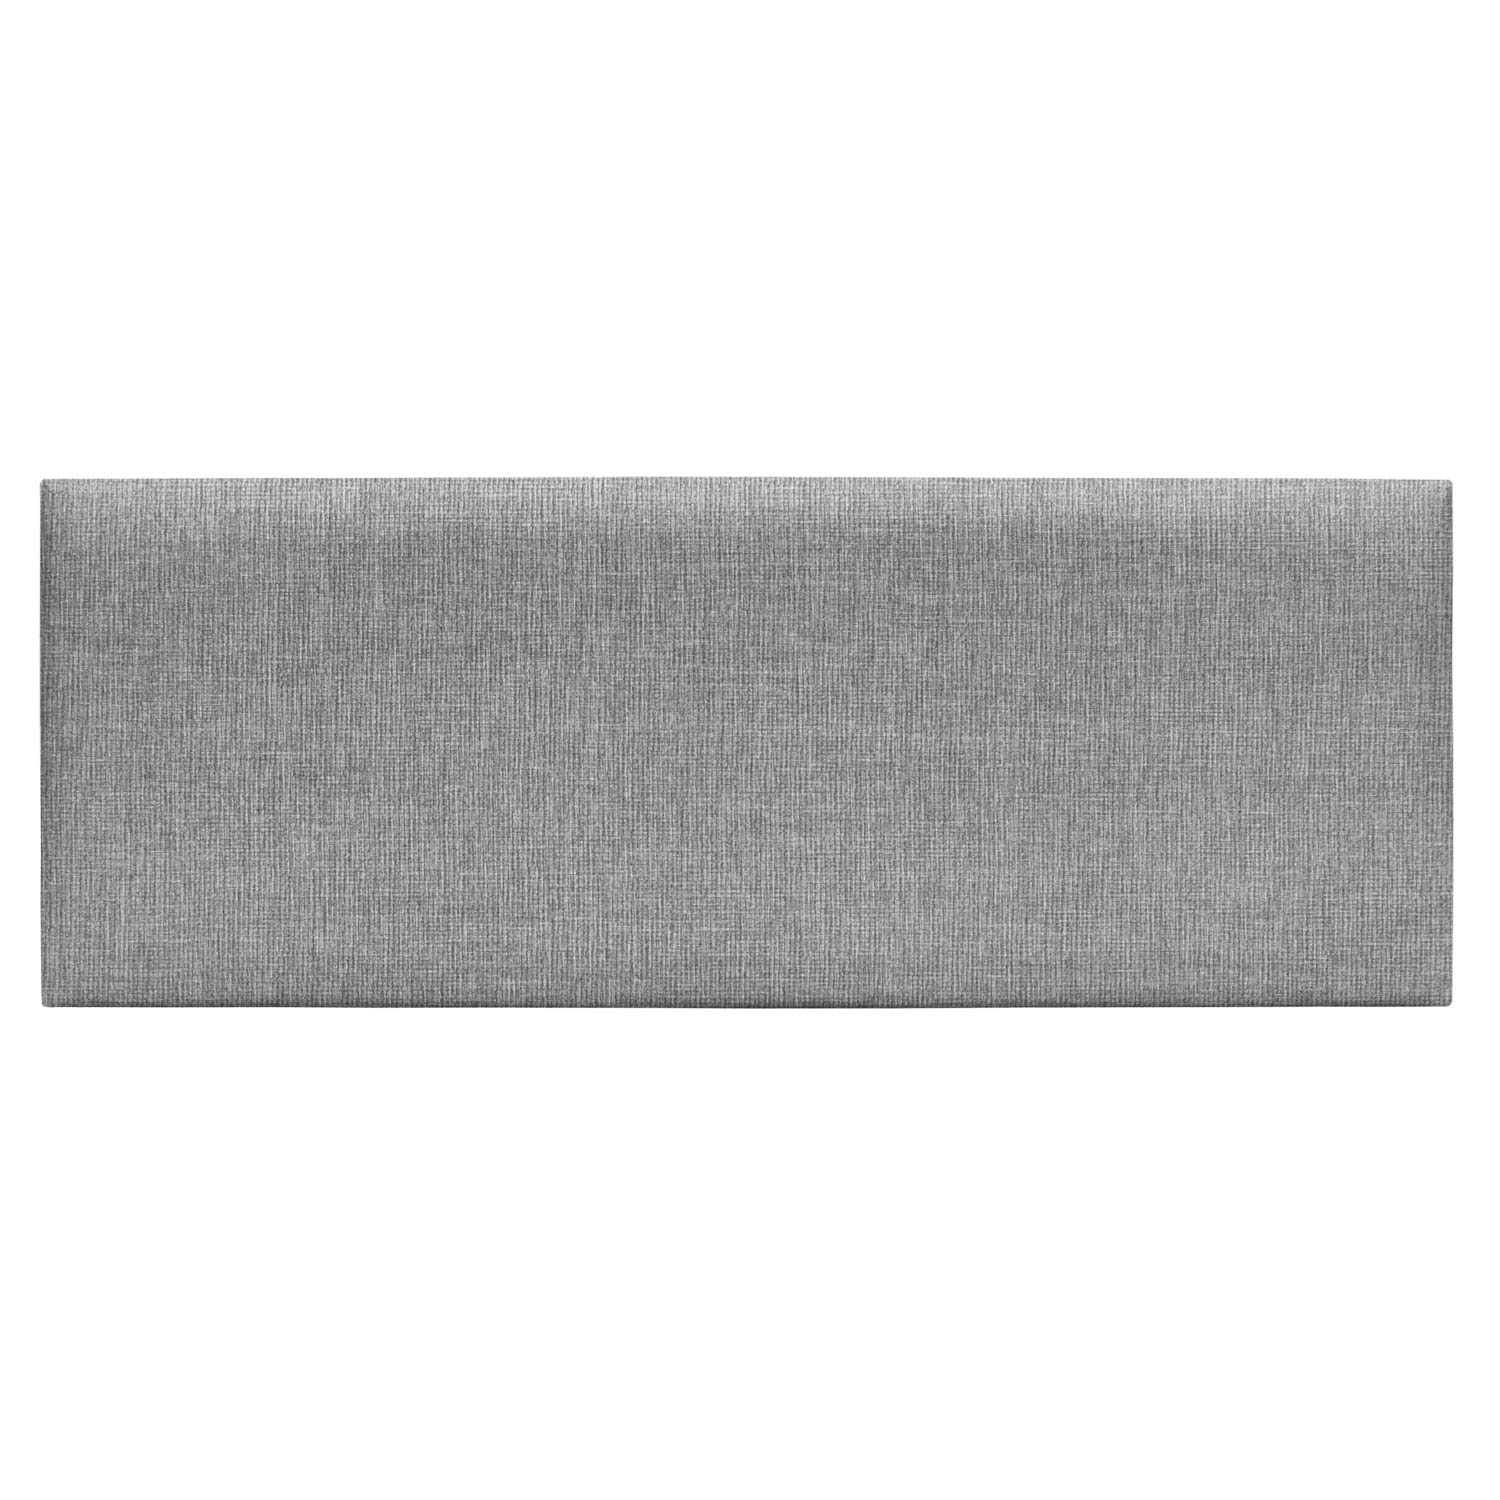 Upholstered Headboard Queen - Set of 8 panels Removable Accent Leather Wall Panels - Gray 31.5